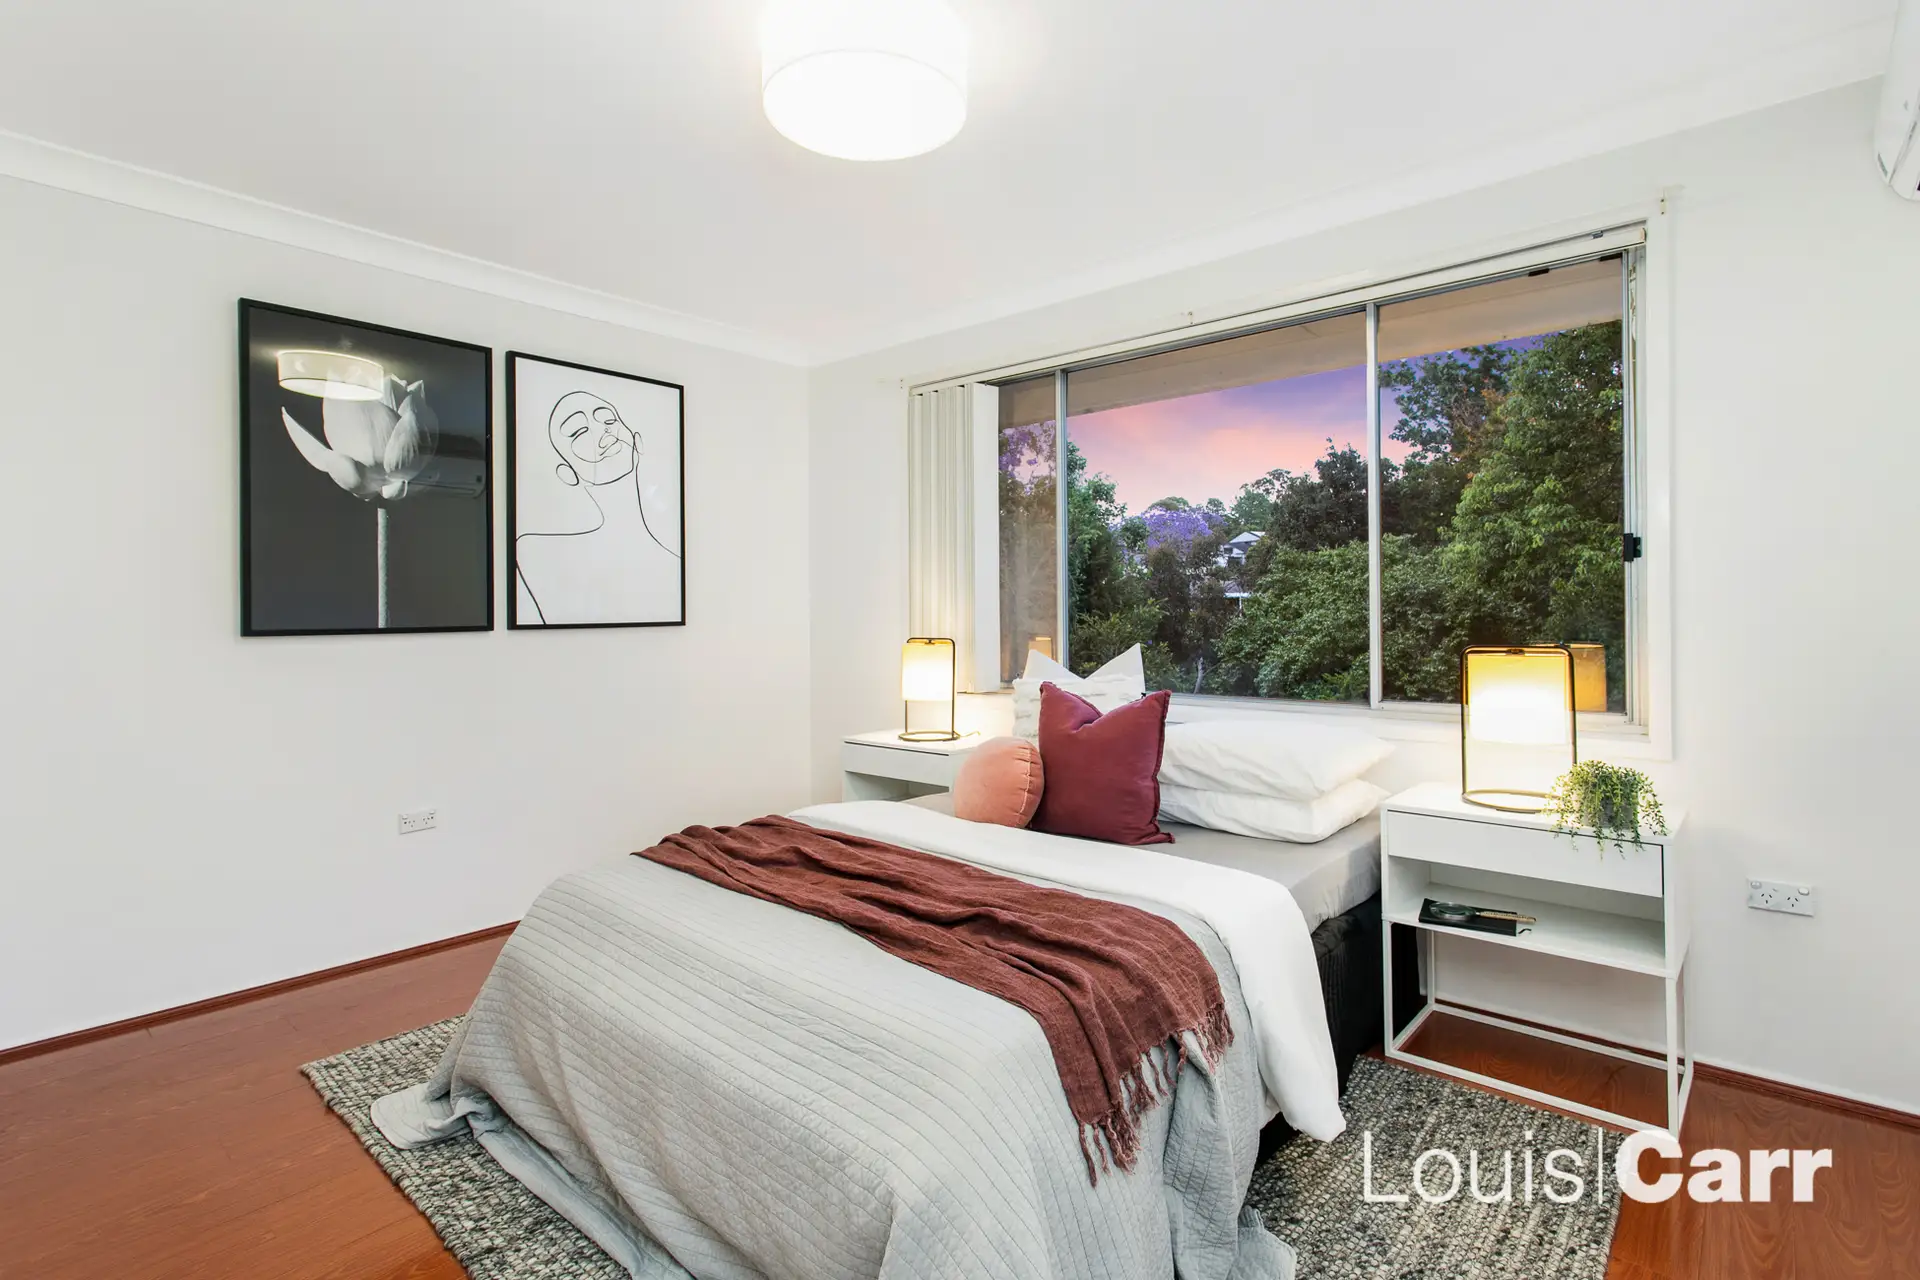 Photo #6: 10A Ashley Avenue, West Pennant Hills - Sold by Louis Carr Real Estate